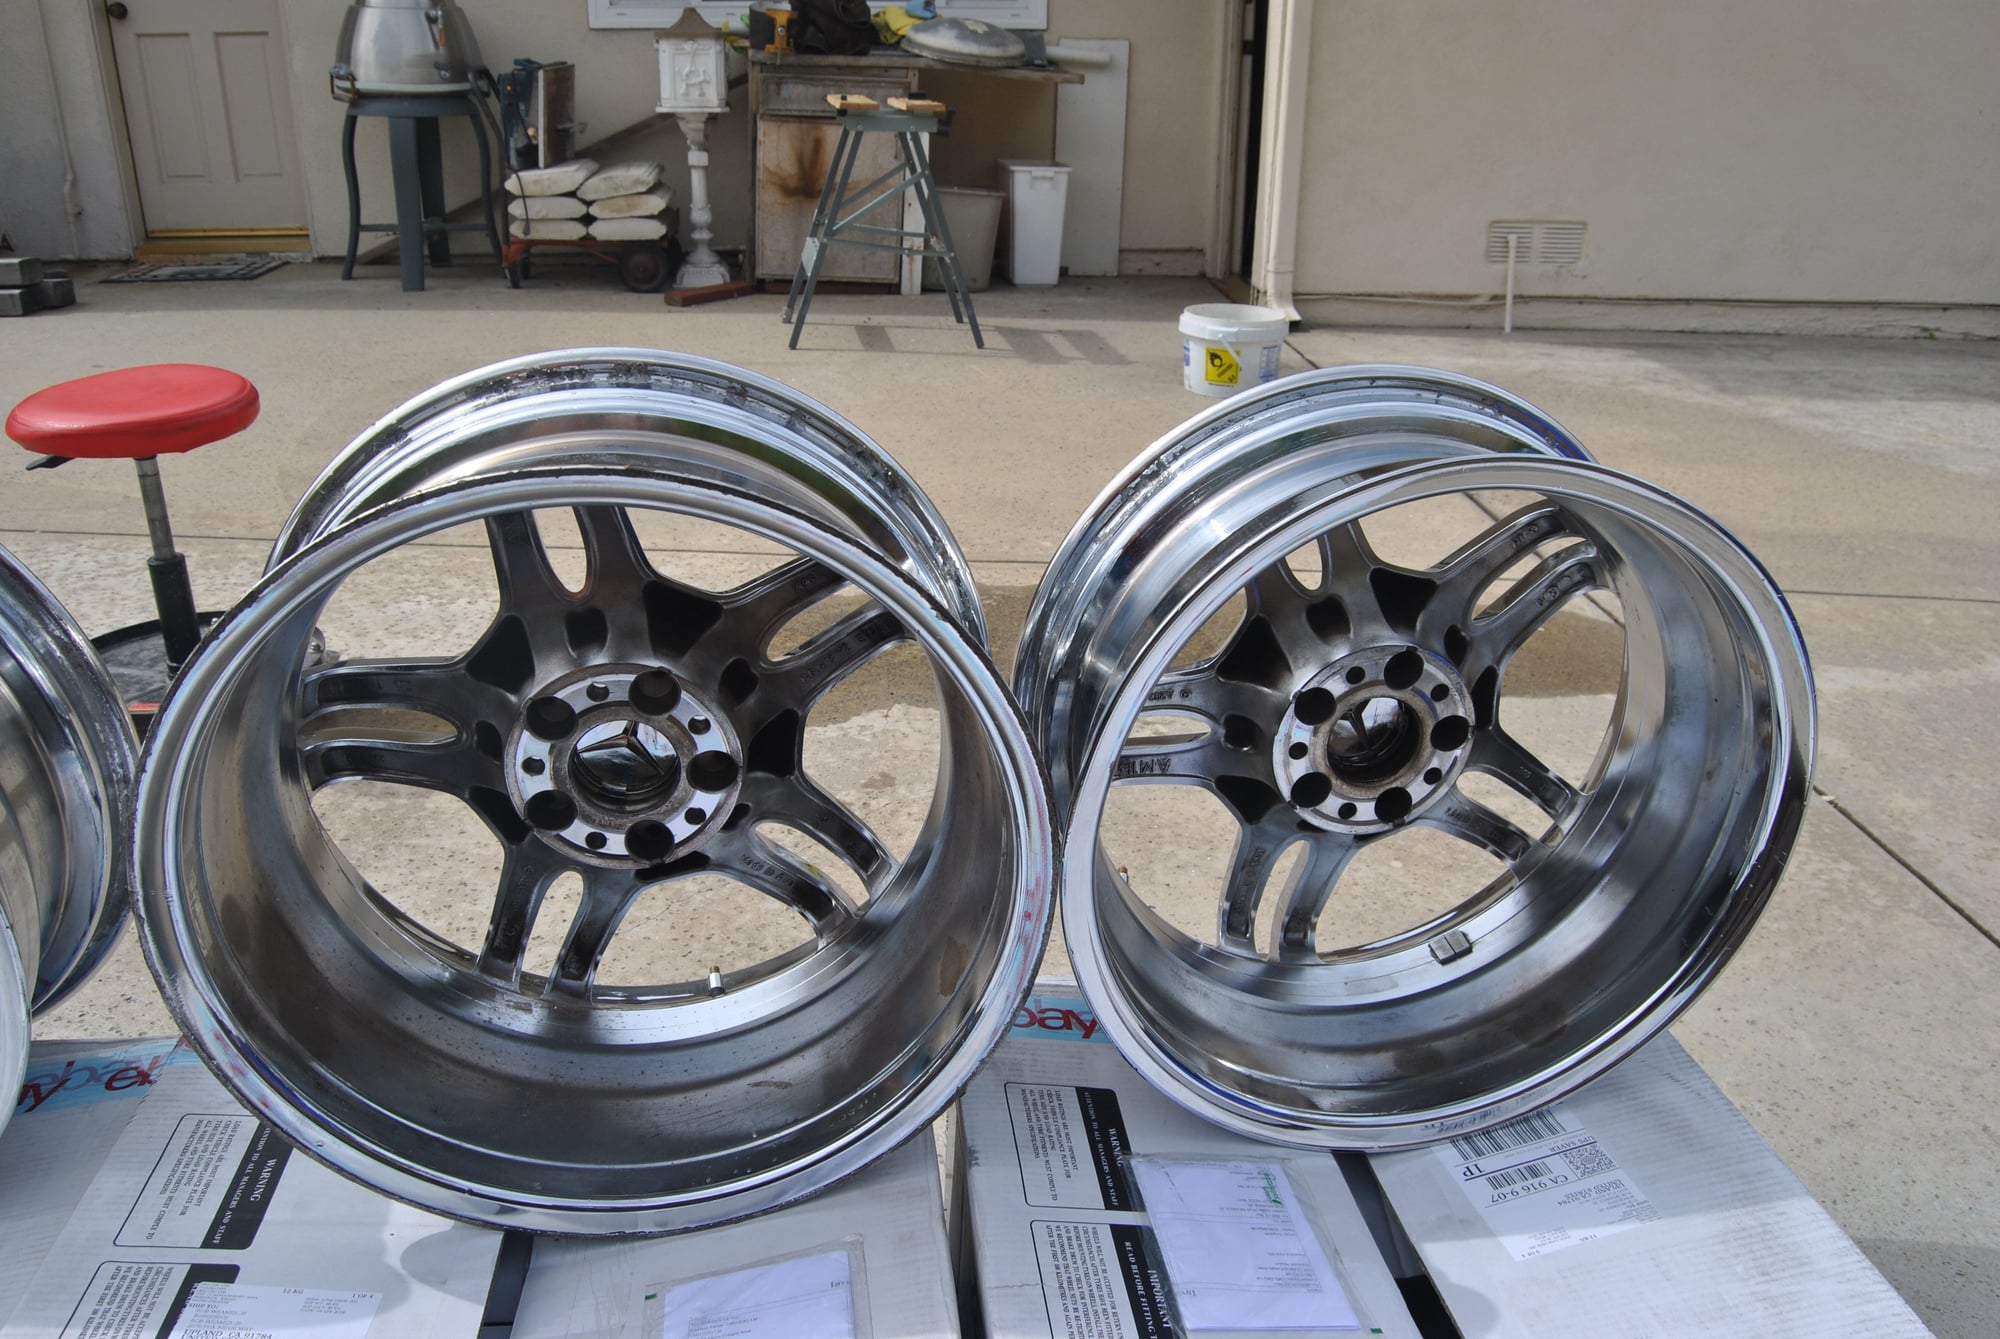 Wheels and Tires/Axles - 2005 C55 AMG 5 Double-Spoke Chrome Wheels - Used - 2005 to 2006 Mercedes-Benz C55 AMG - Upland, CA 91784, United States